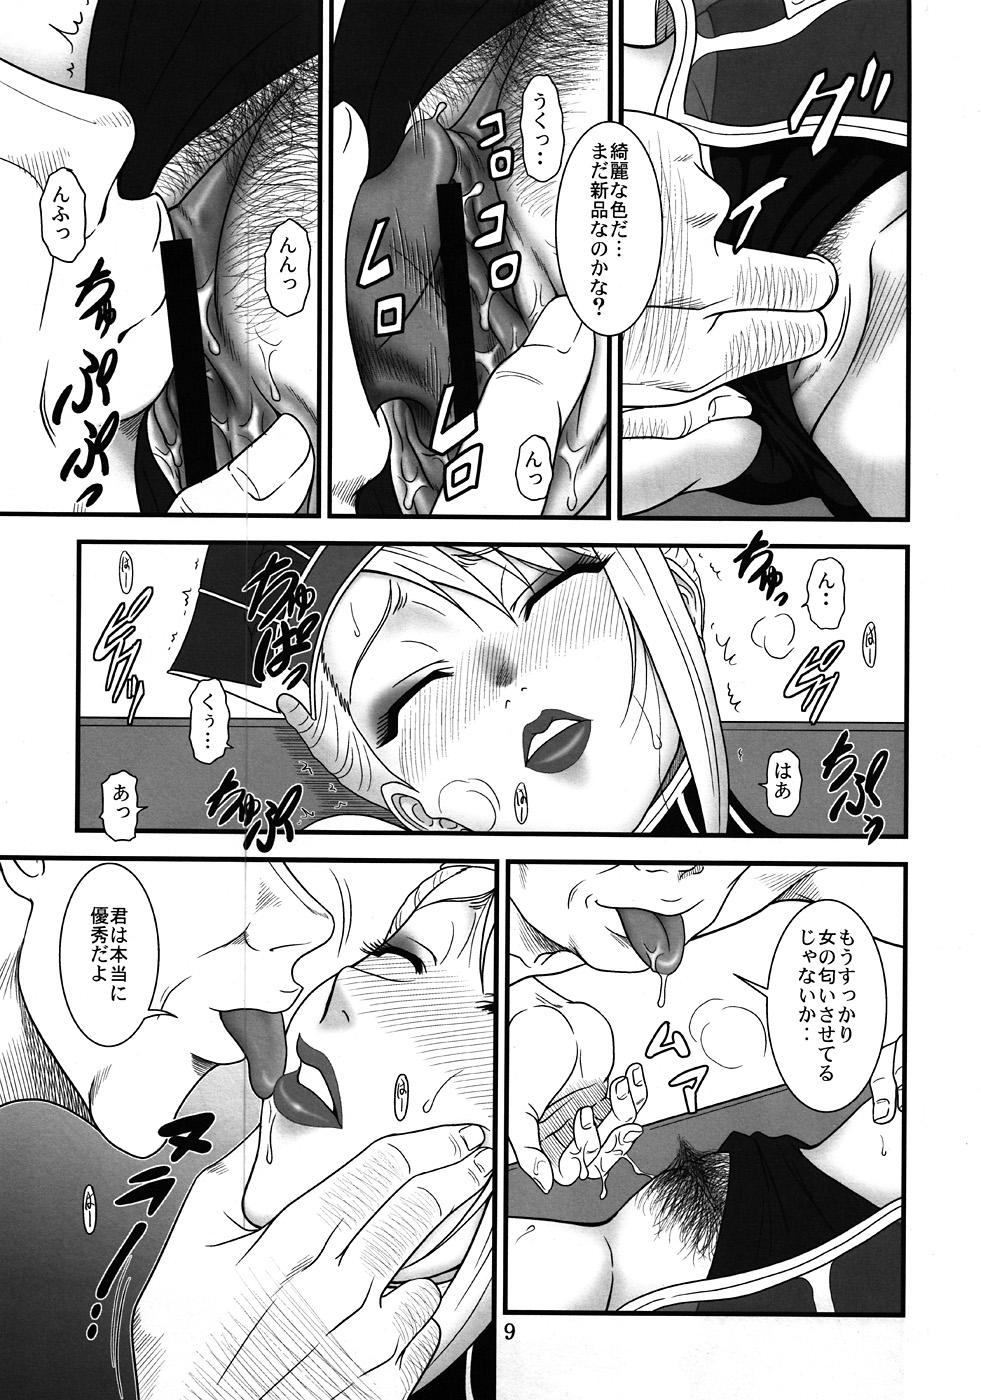 Leaked Blue Business - Tiger and bunny Twistys - Page 8